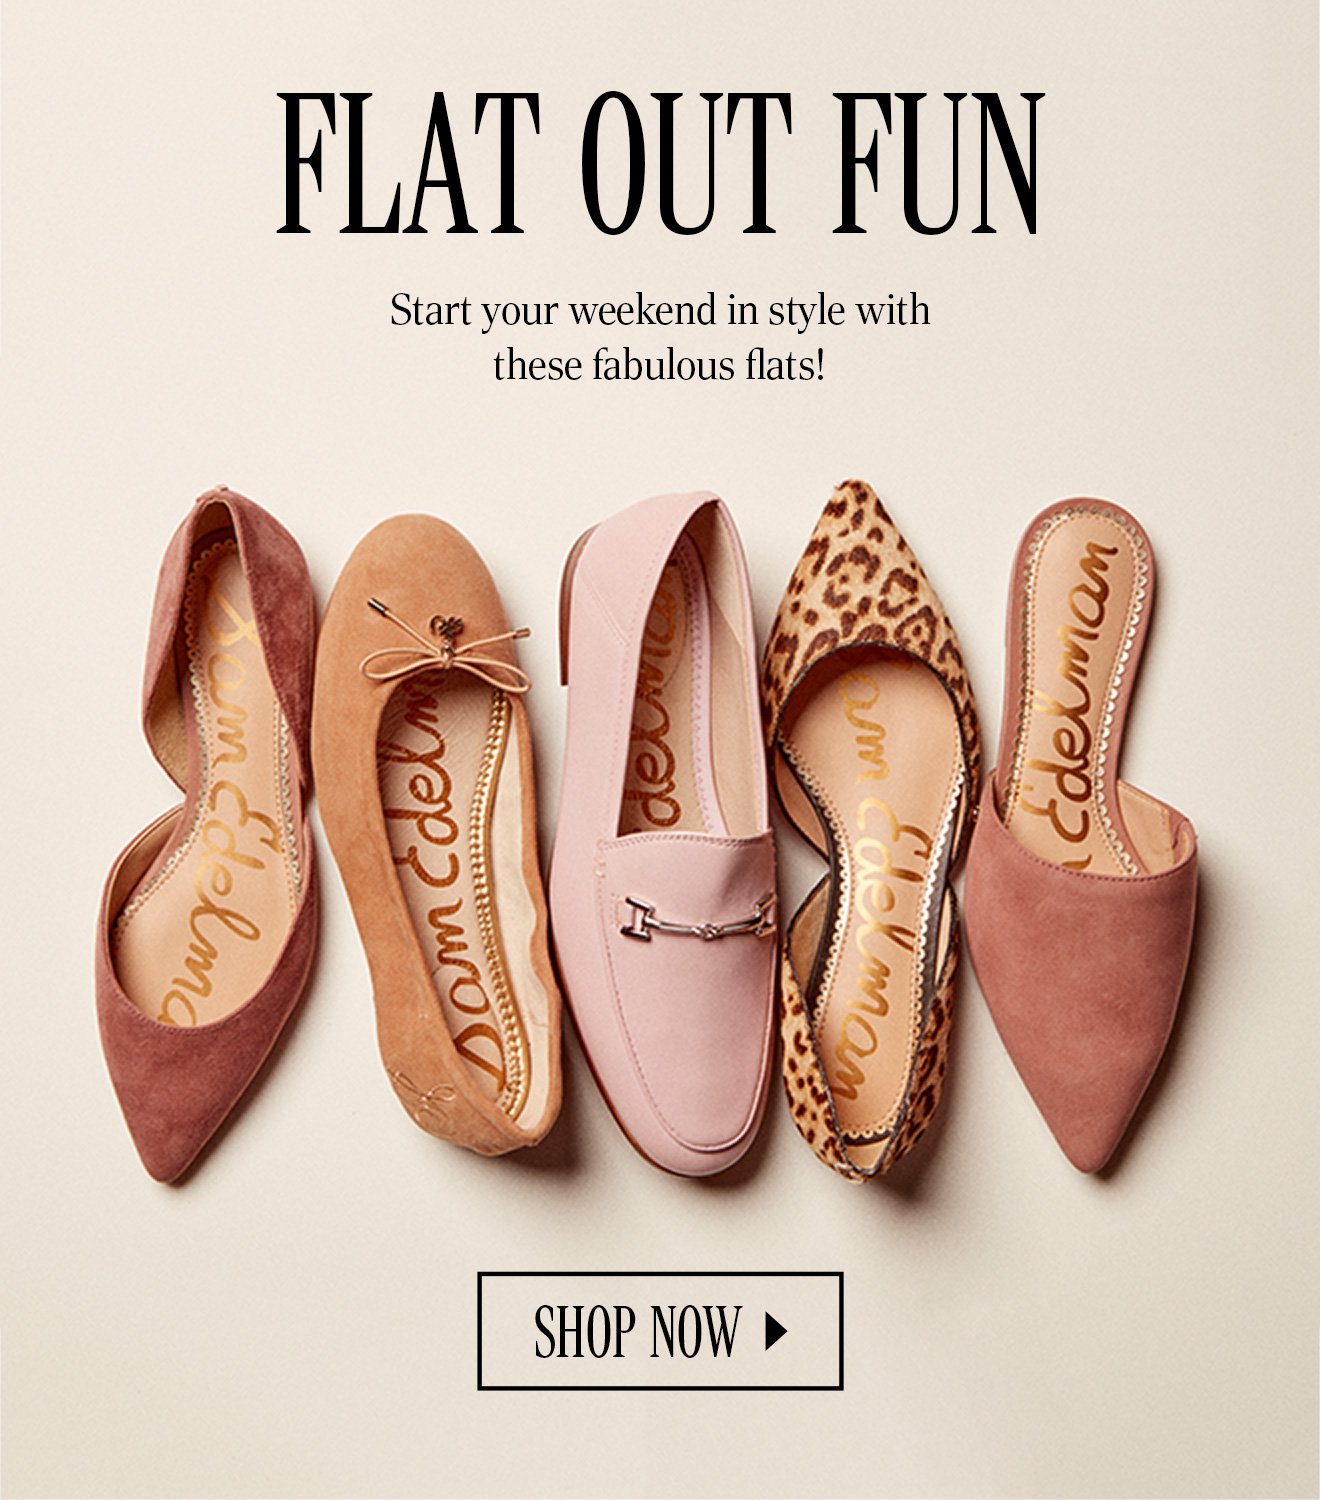 FLAT OUT FUN. Start your weekend in style with these fabulous flats! SHOP NOW